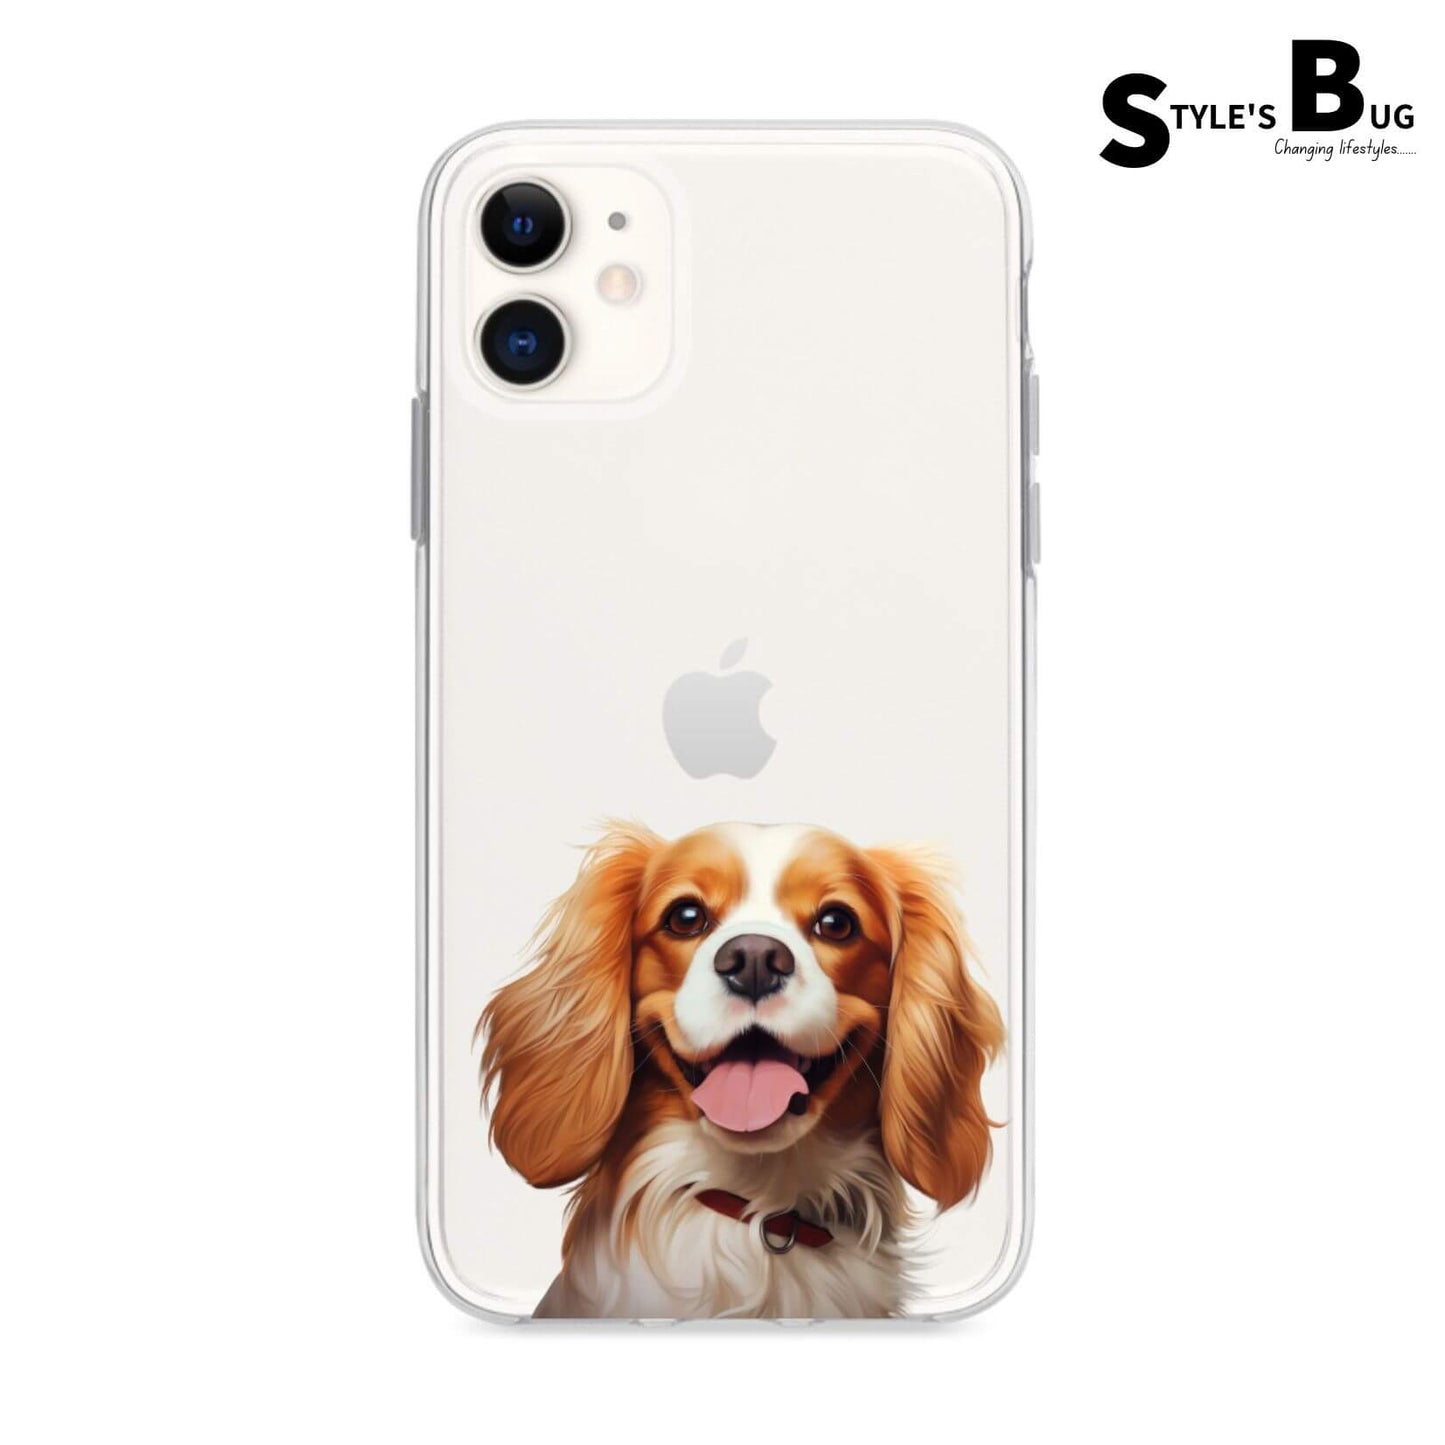 Smiling Dog phone cases from Style's Bug (UV printed) - Style's Bug Cavalier King Charles Spaniel